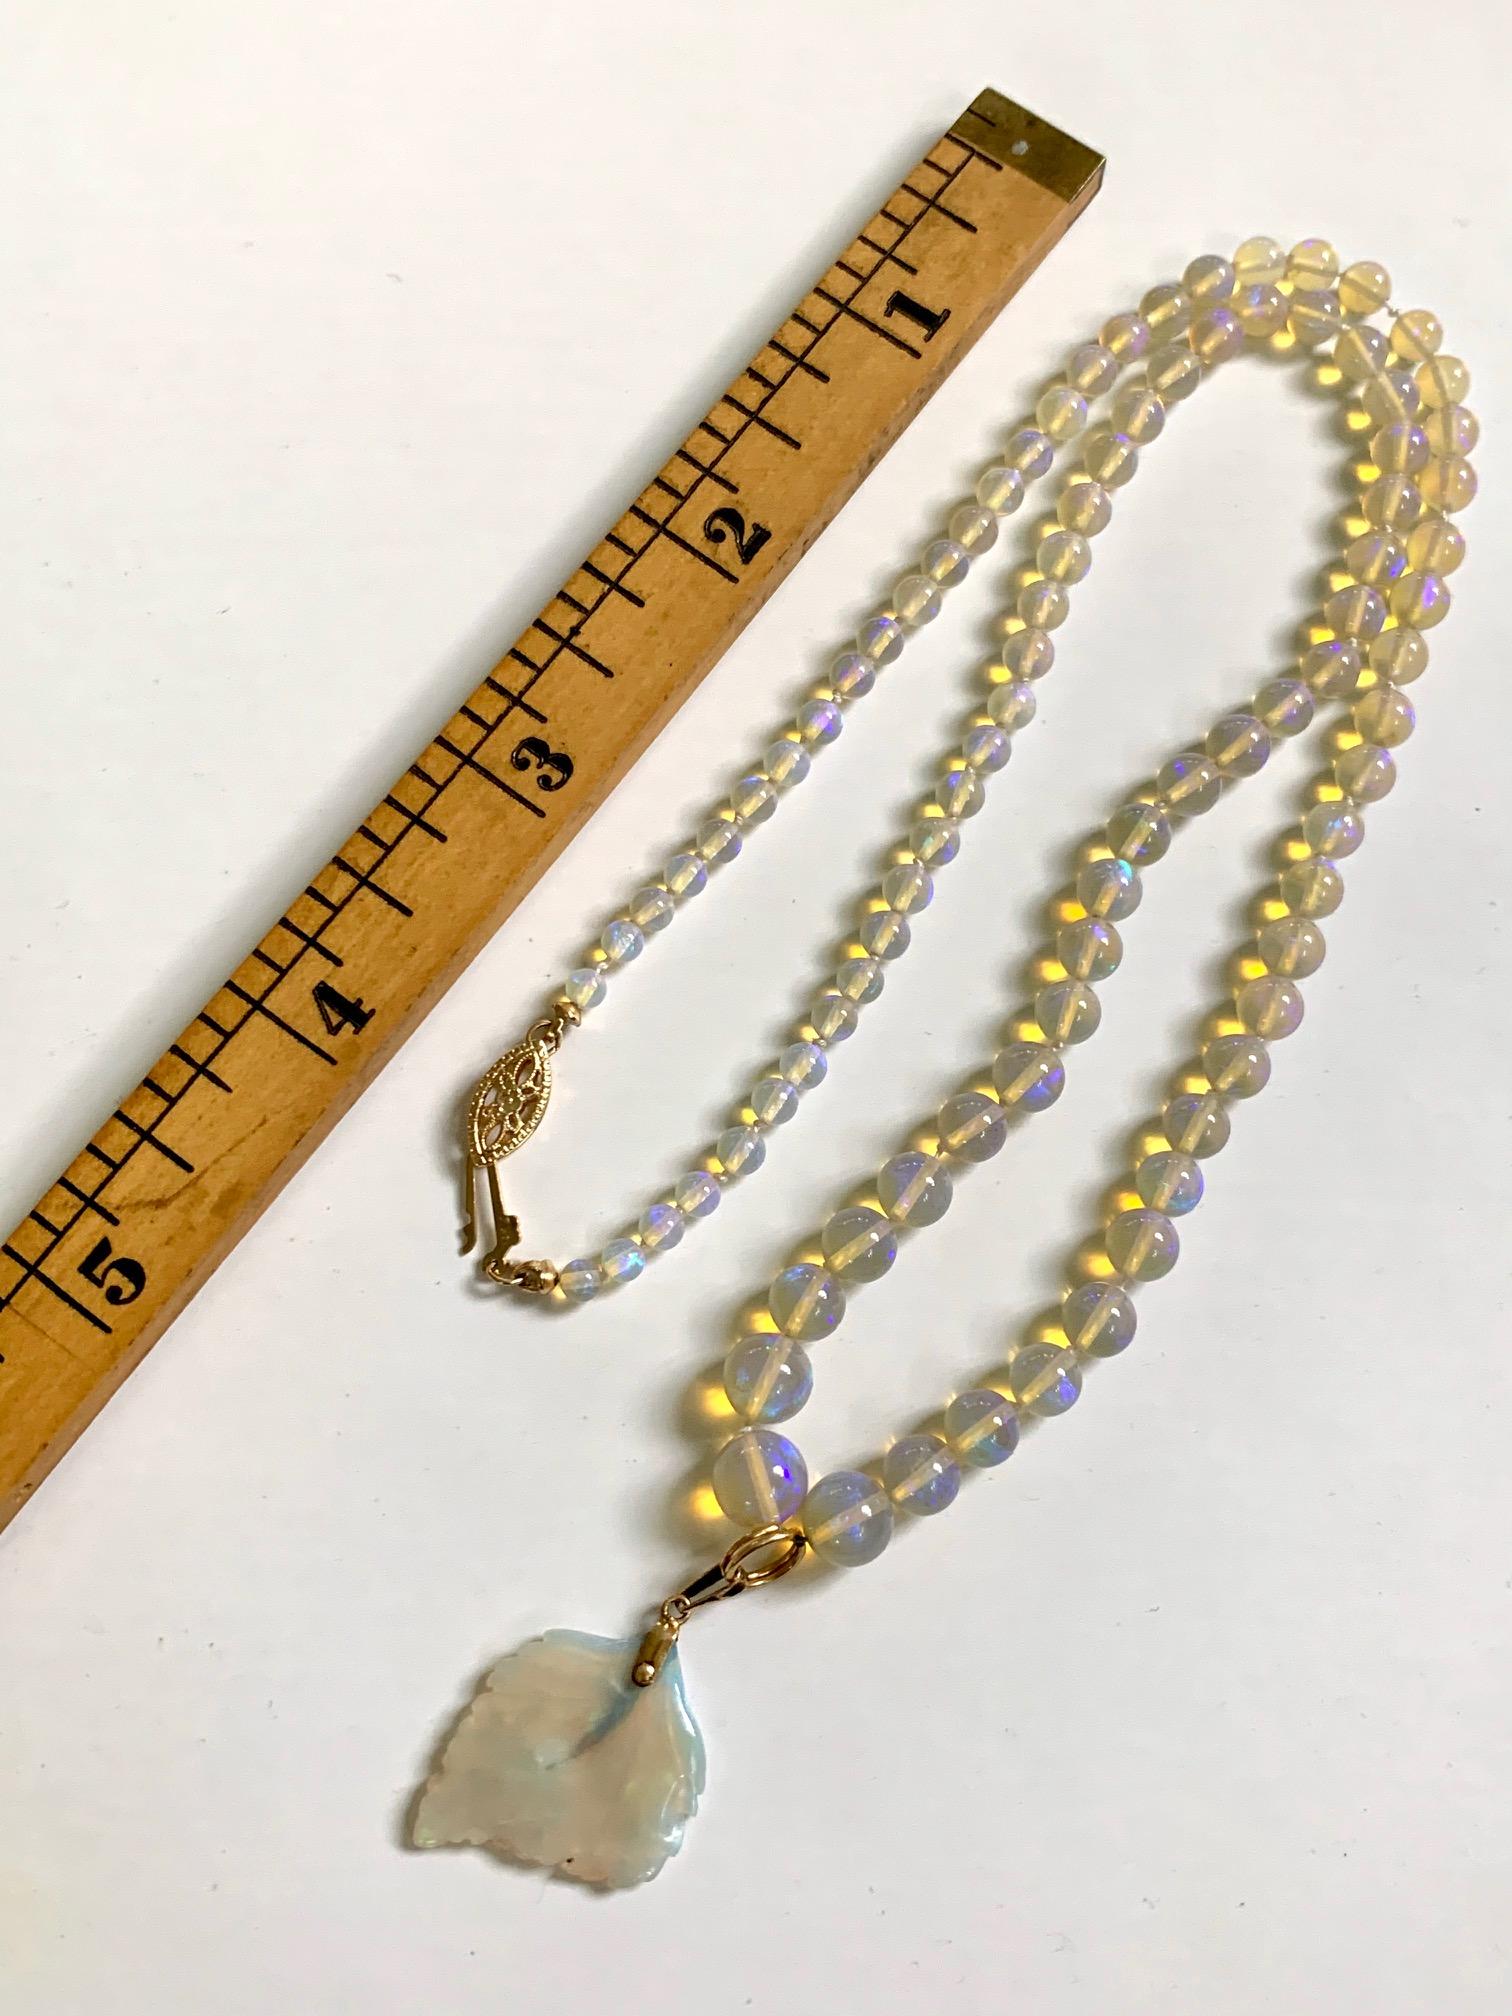 Australian Andamooka Opal Bead Pendant and Necklace with 14 Karat Gold Clasp For Sale 4